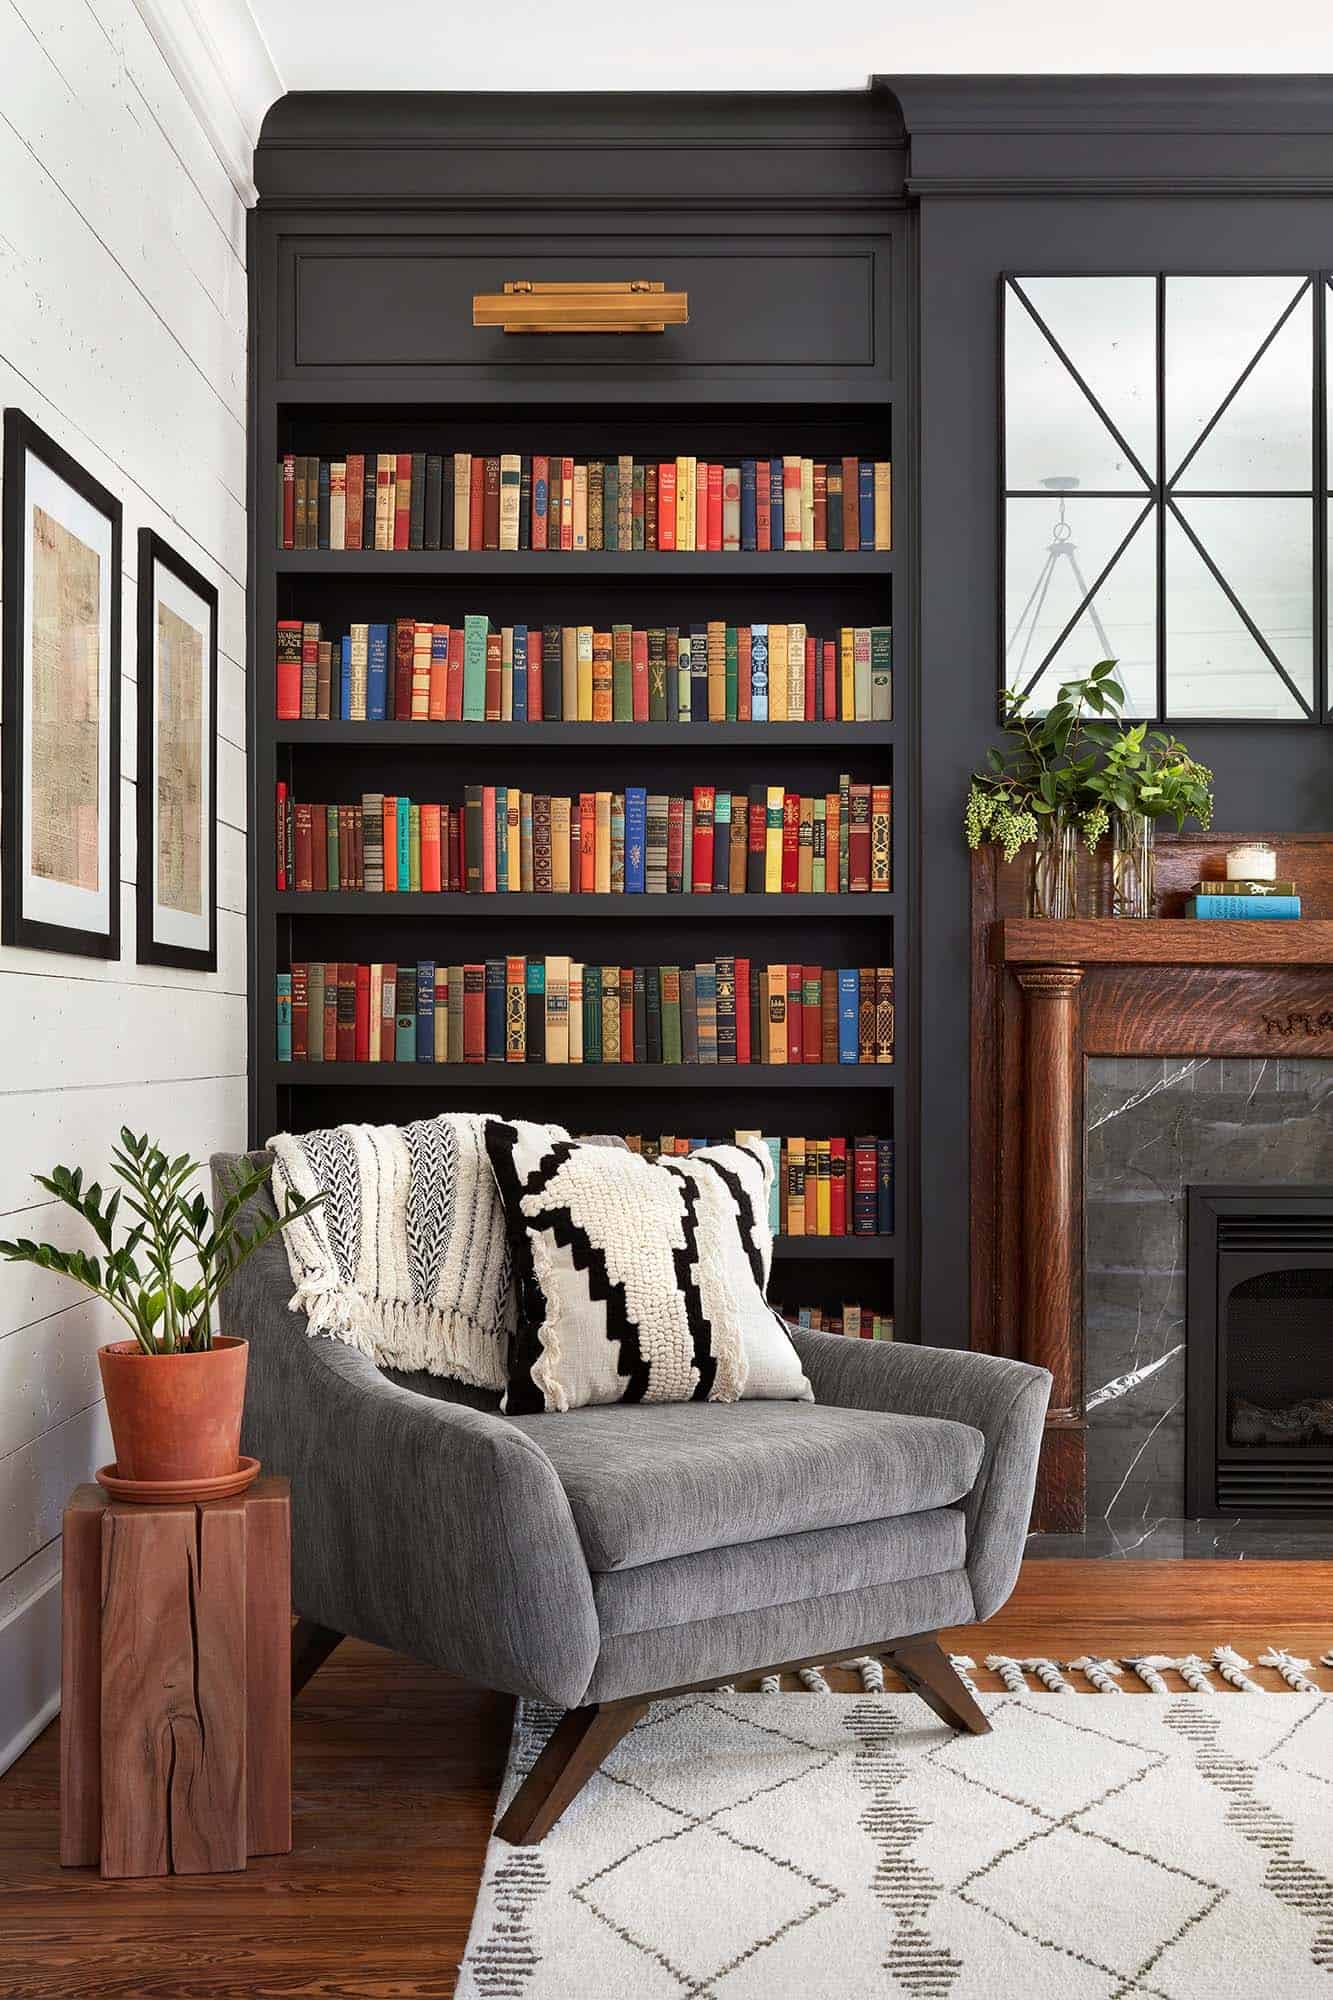 Cozy Fireplace Reading Nooks, Bookcases Next To Stone Fireplace